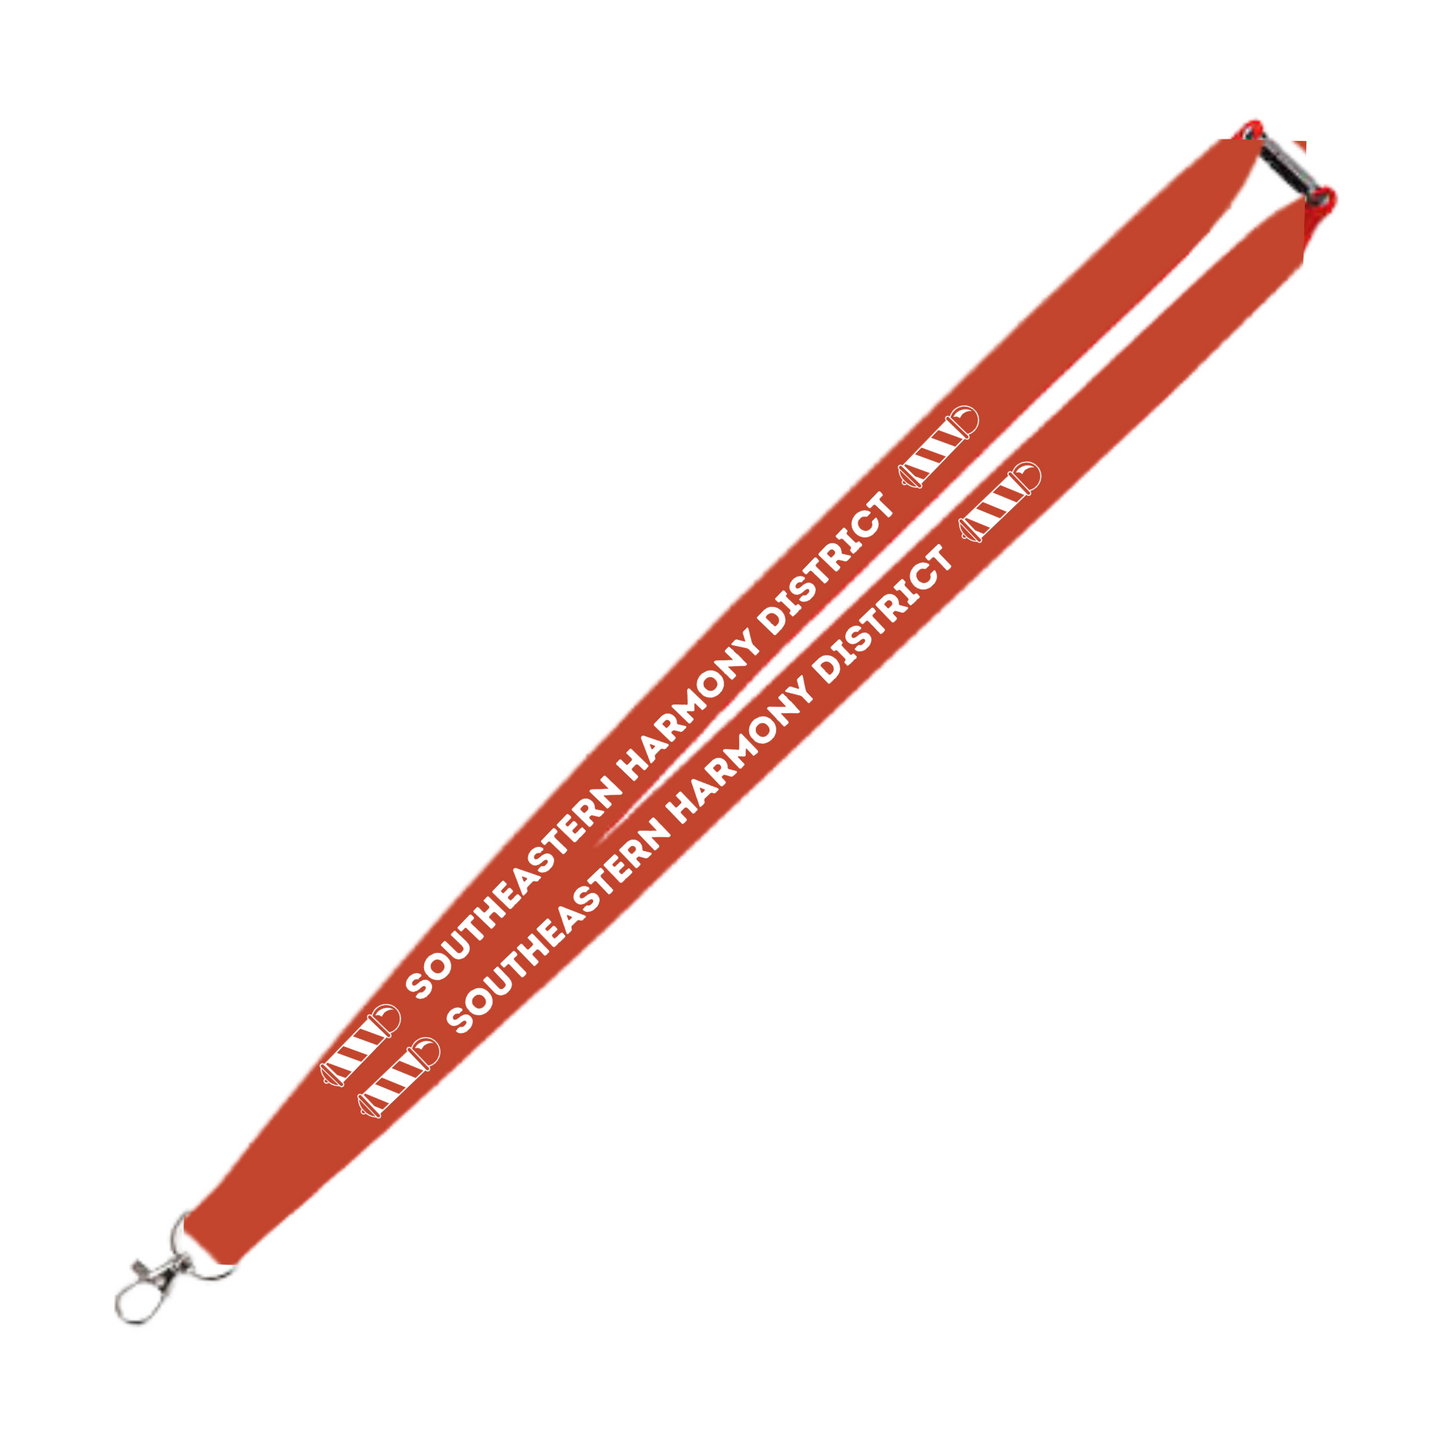 Southeastern Harmony District - Printed Lanyards